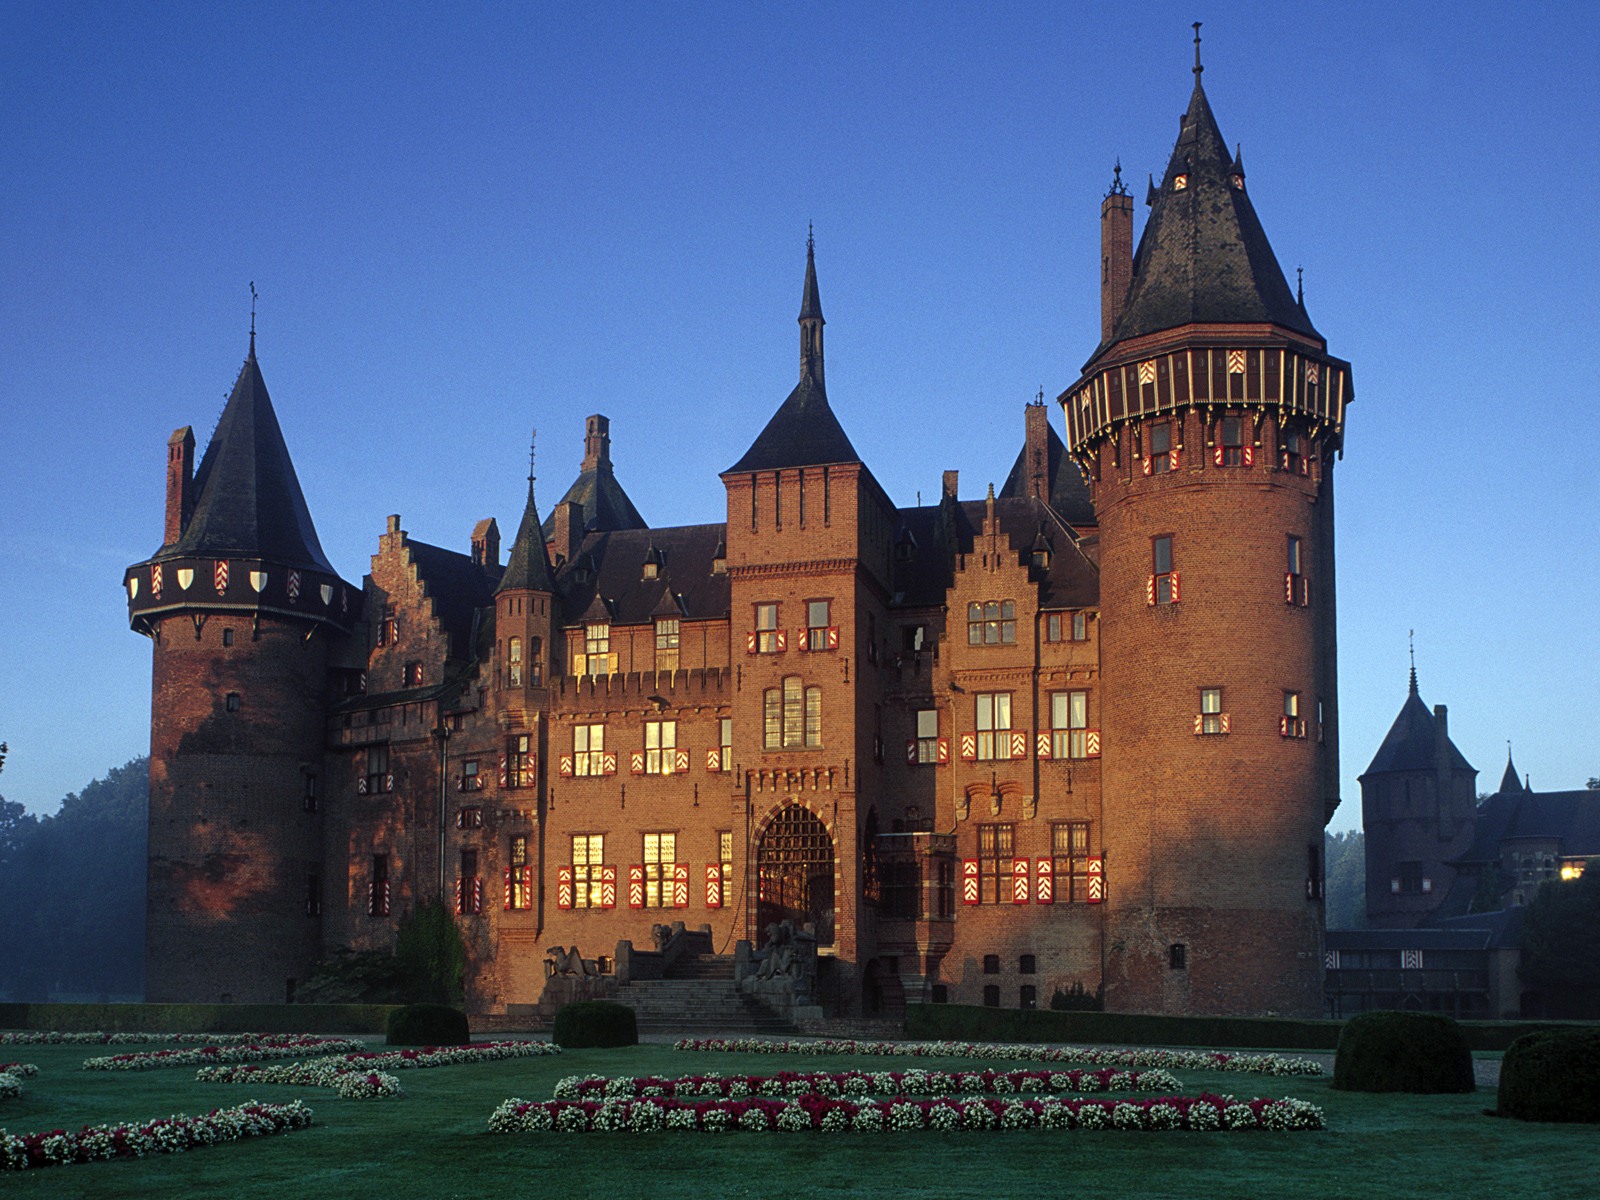 Windows 7 Wallpapers: Castles of Europe #2 - 1600x1200